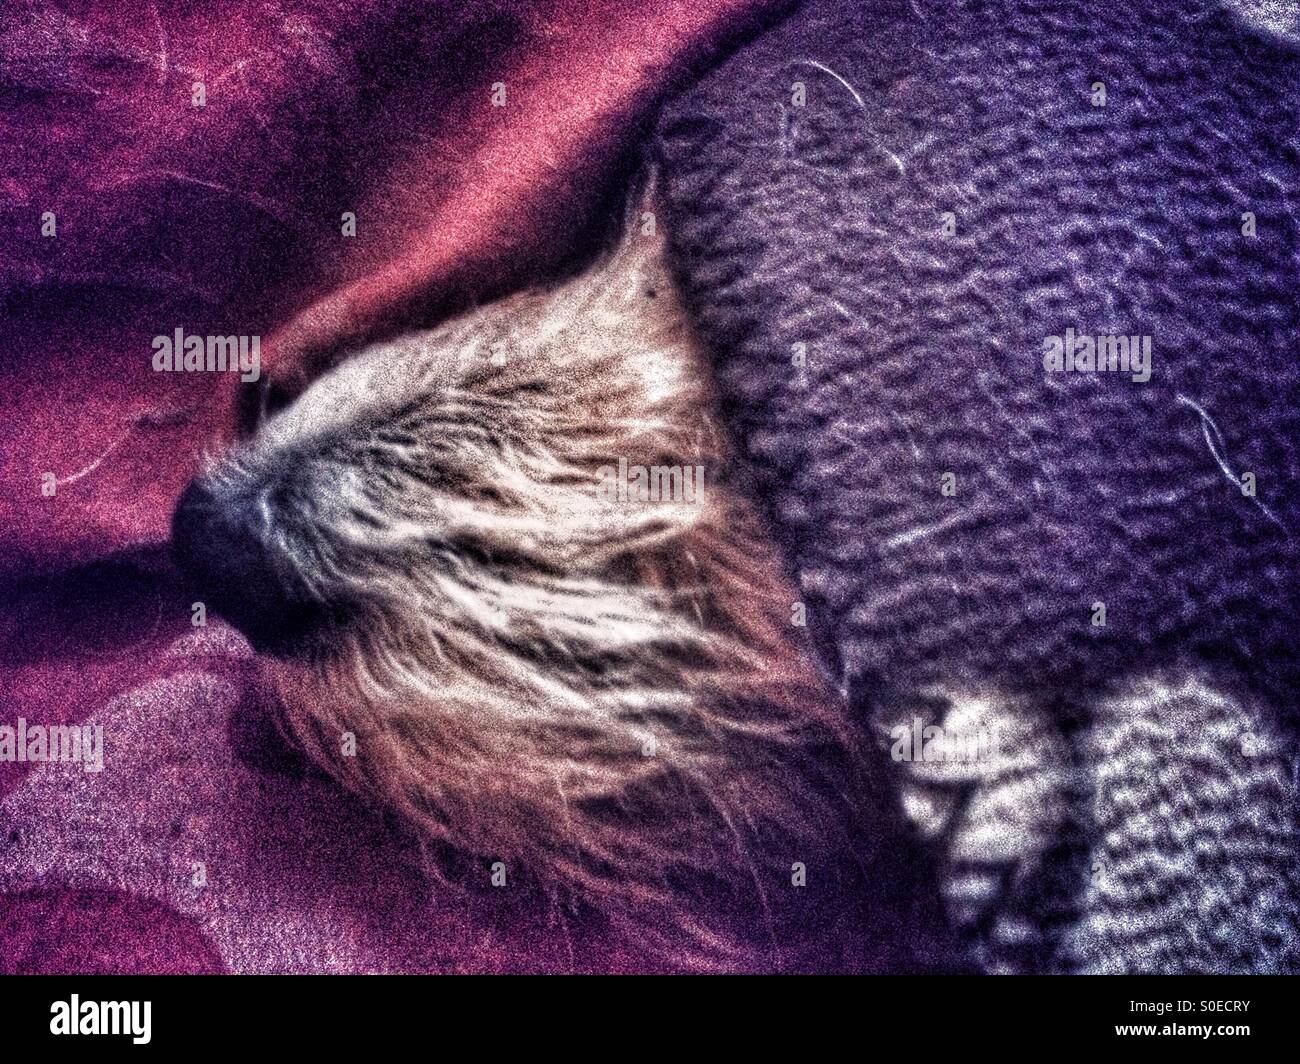 Sleeping dogs muzzle poking out from blanket Stock Photo